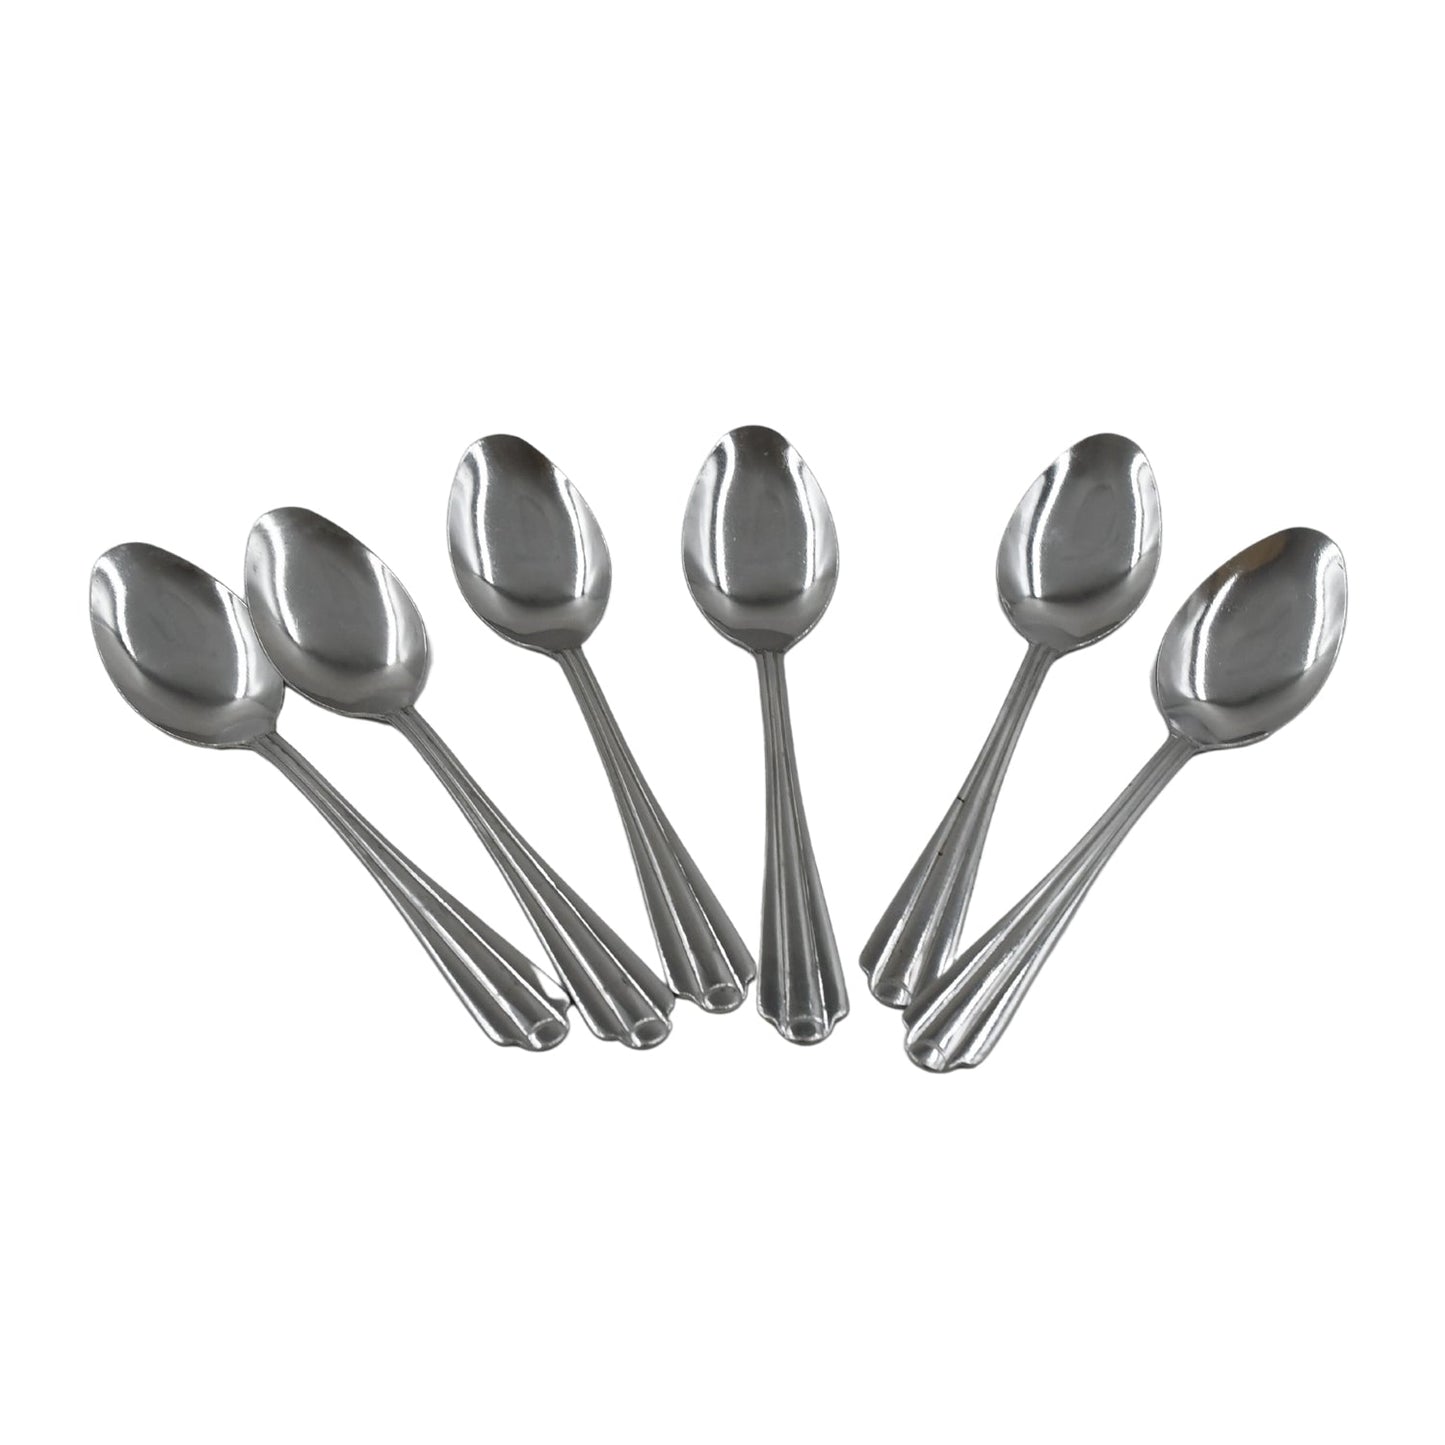 5933 Stainless Steel Spoon Set of 6, Table Spoon Great Housewarming Gift, Food Grade Silverware for Home, Kitchen or Restaurant - Mirror Polished